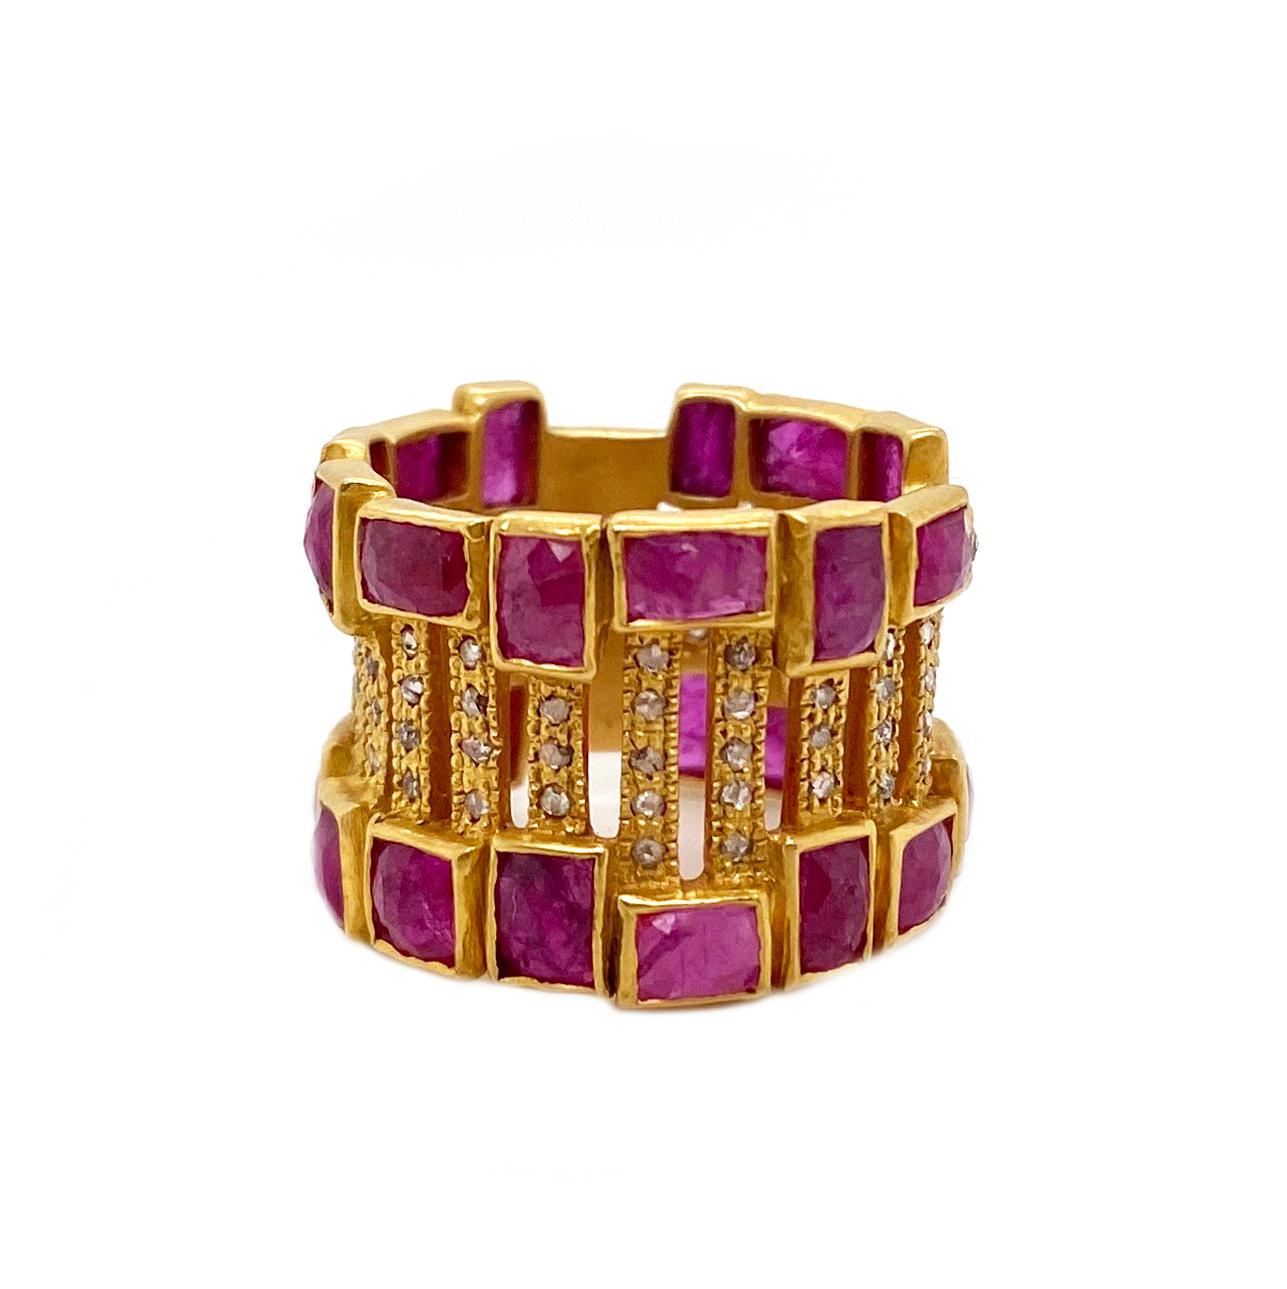 Stunning and one of a kind cocktail brand ring showcasing in 20K Yellow Gold and handcrafted in 7.40cts Ruby and 0.43cts Diamonds, brought to you by the Luminosity collection from Coomi, which consists of bold design and reflects light from within